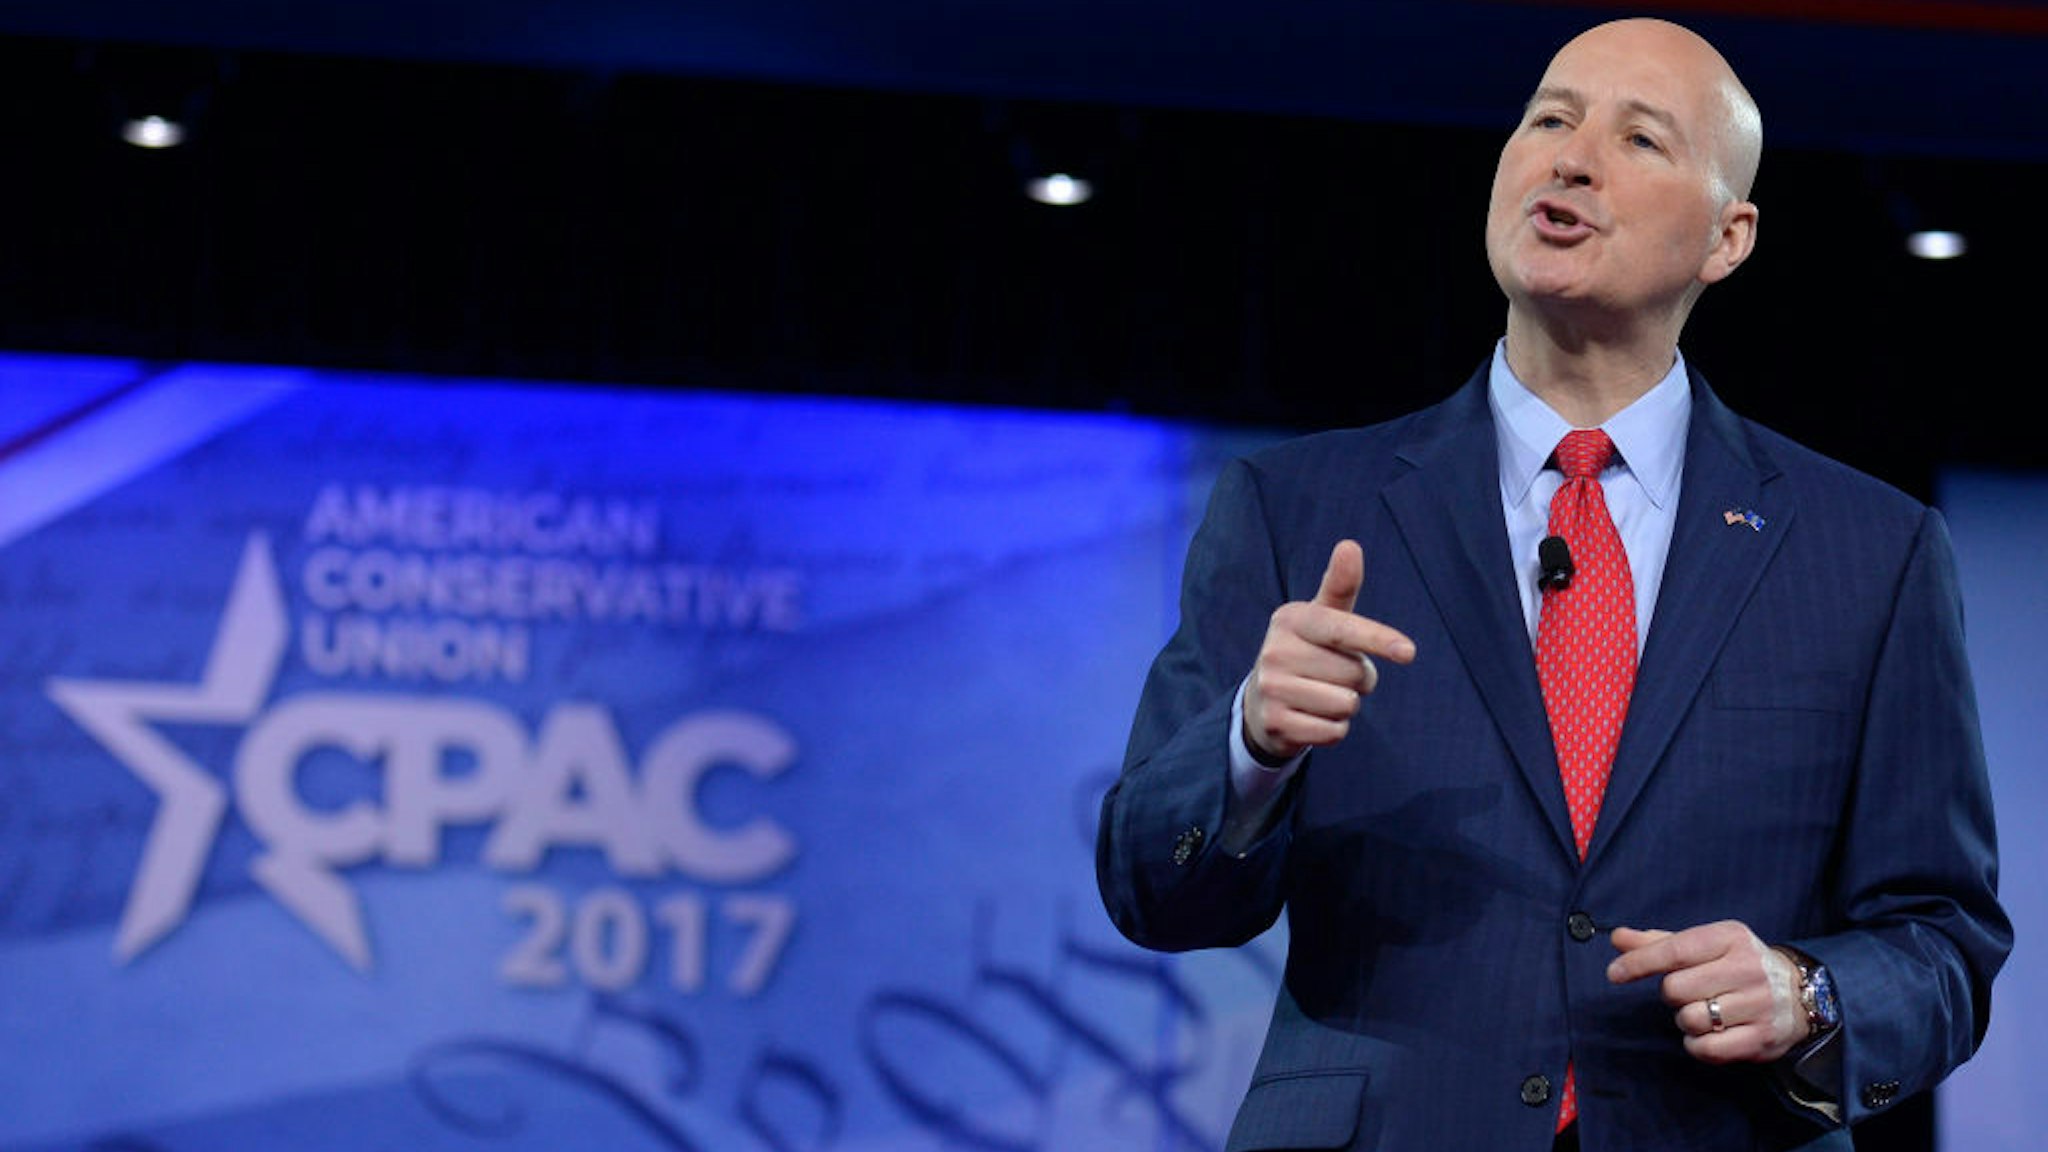 Nebraska Governor Pete Ricketts speaks to the Conservative Political Action Conference (CPAC) at National Harbor, Maryland, February 24, 2017. / AFP / Mike Theiler (Photo credit should read MIKE THEILER/AFP via Getty Images)